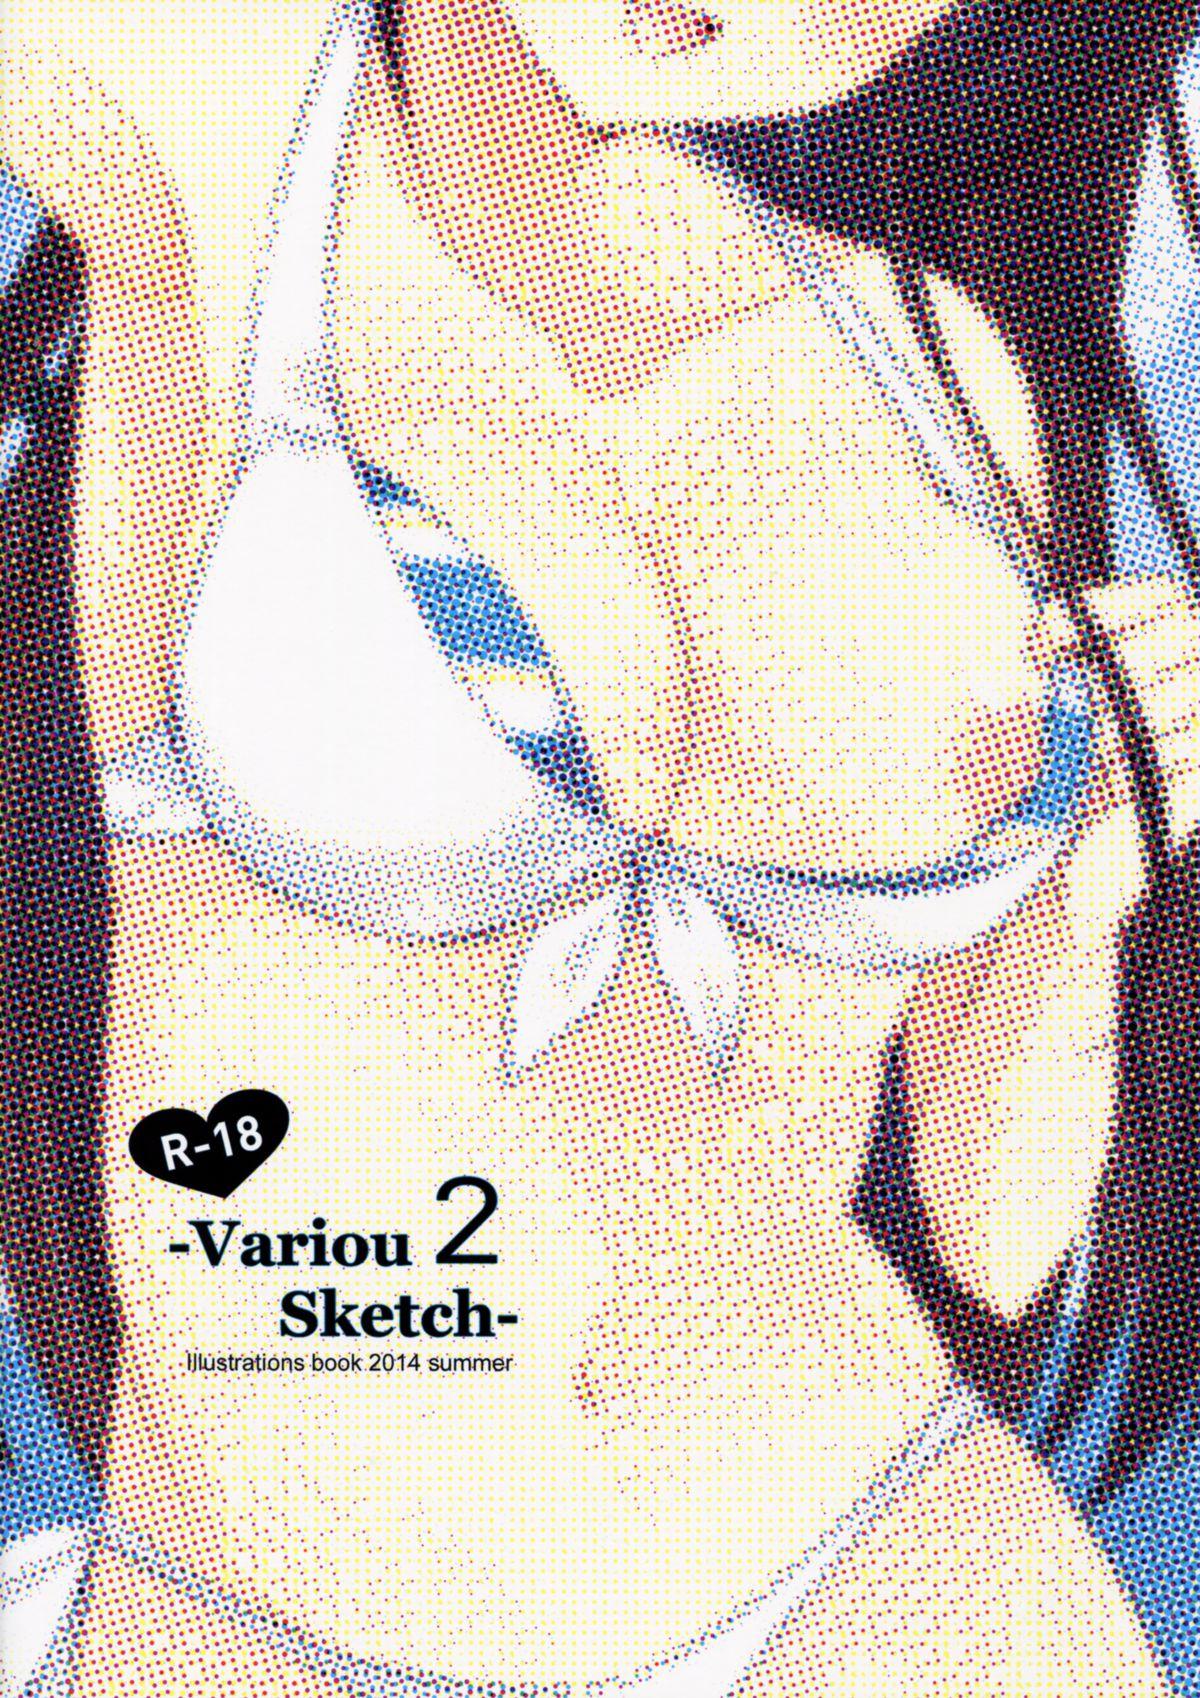 VariouSketch 2 20